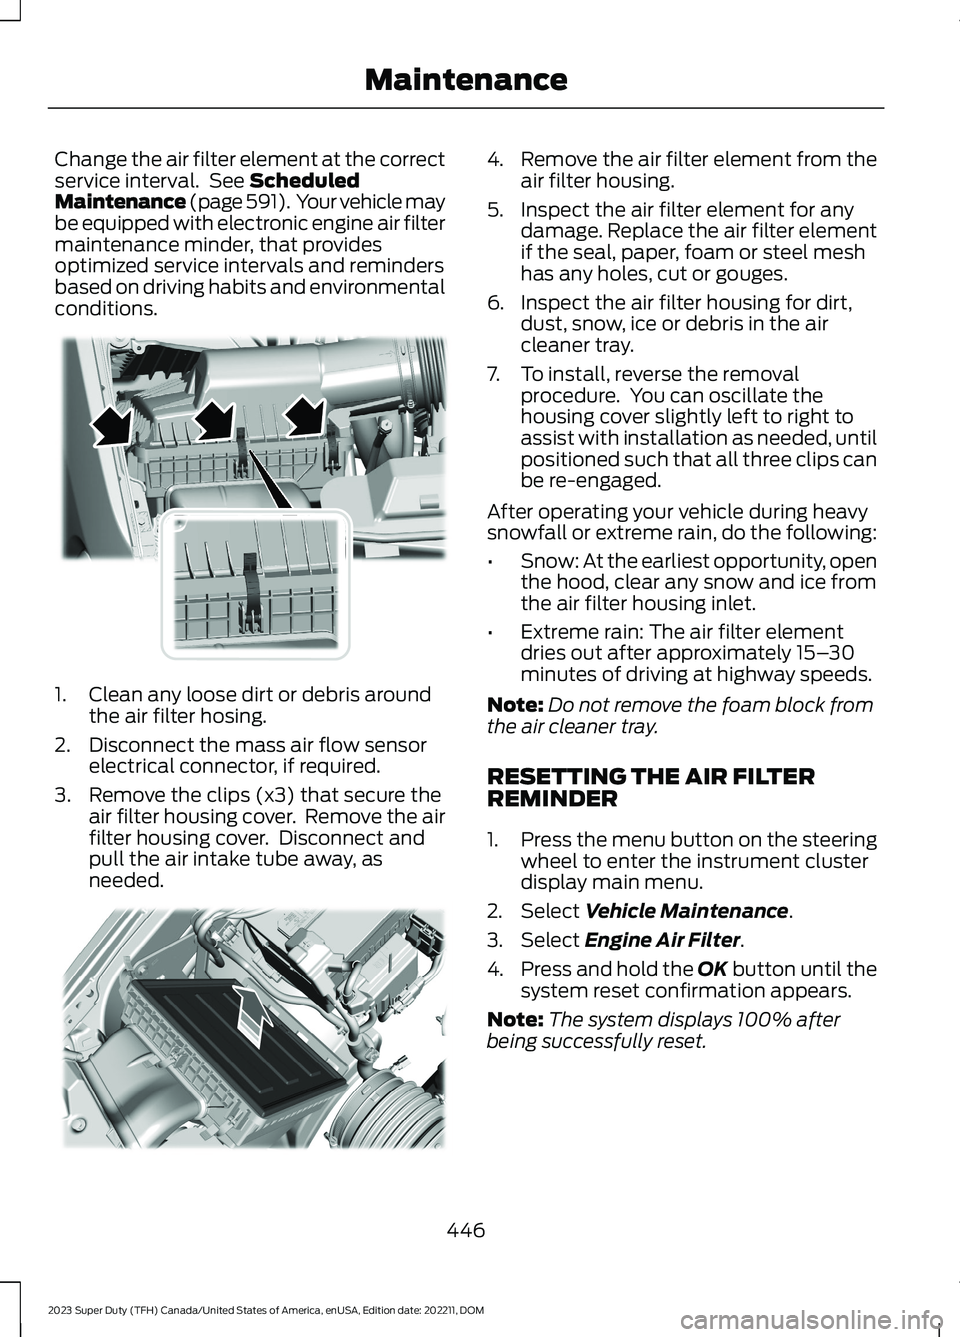 FORD SUPER DUTY 2023  Owners Manual Change the air filter element at the correctservice interval. See ScheduledMaintenance (page 591). Your vehicle maybe equipped with electronic engine air filtermaintenance minder, that providesoptimiz